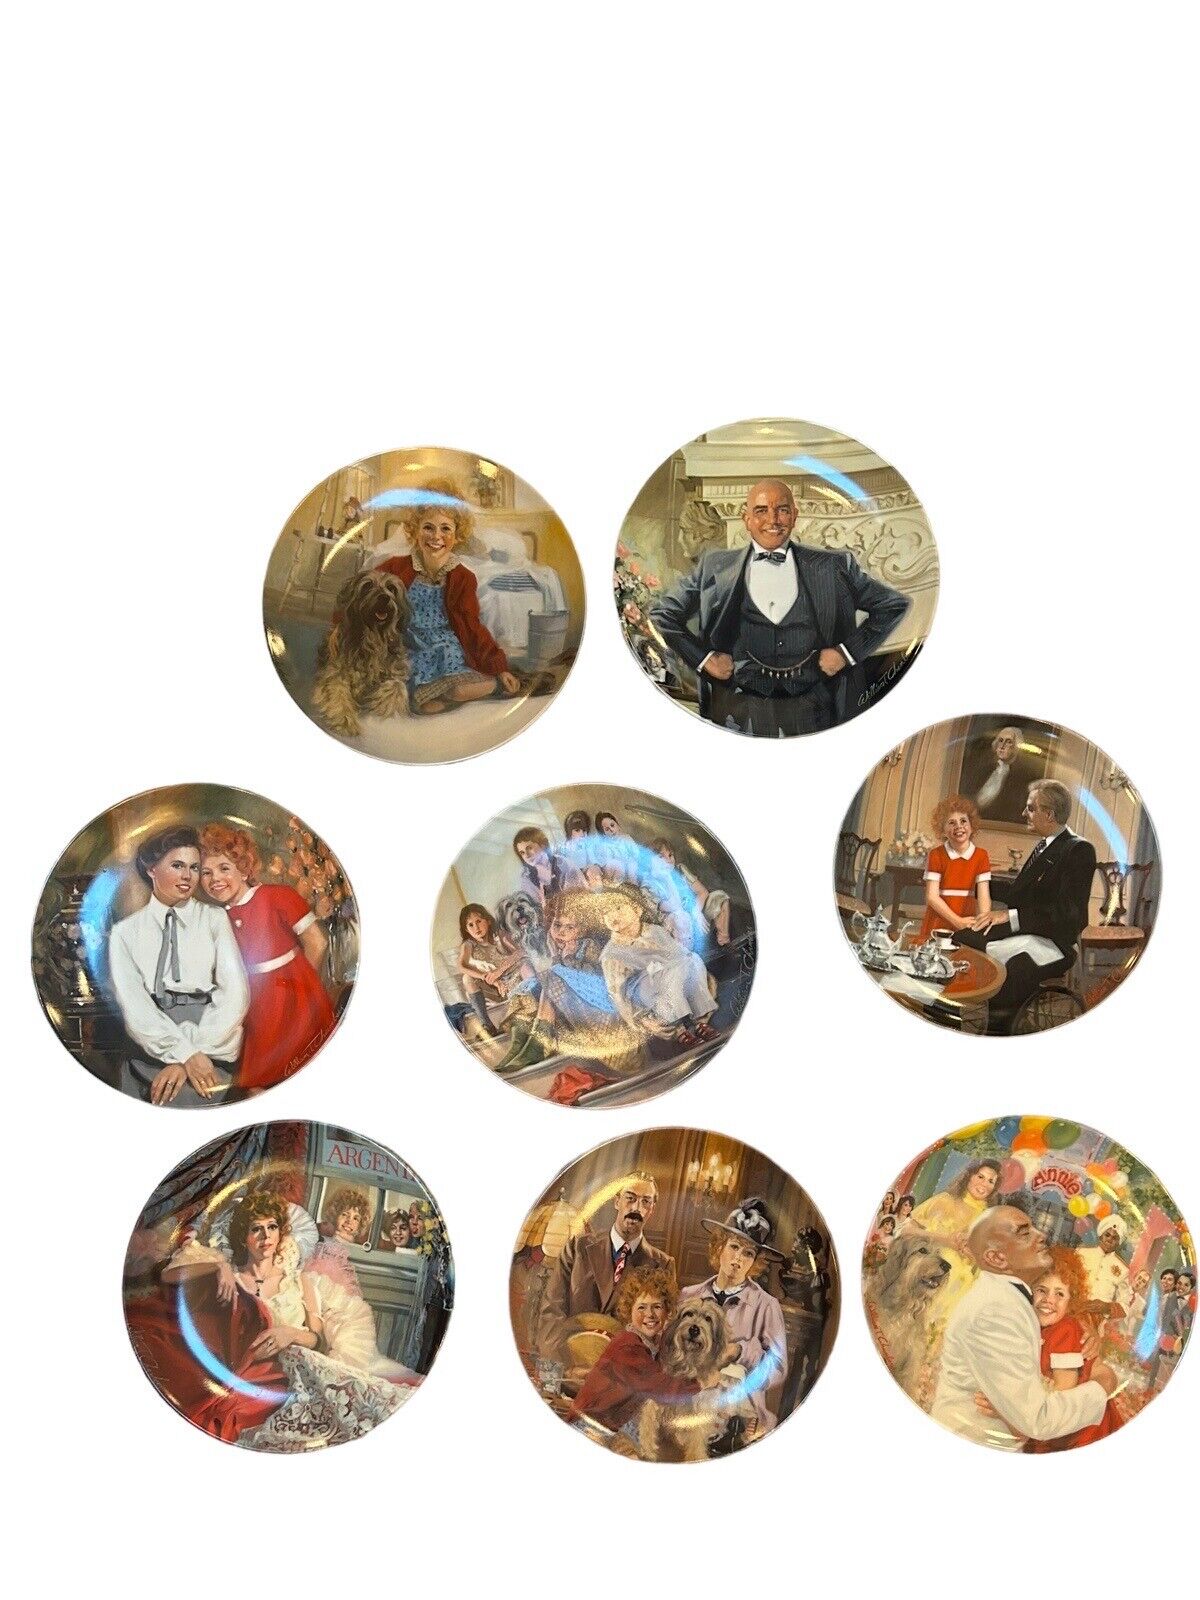 Annie Collector Plates Complete 8 Knowles Plate Series 1980's.